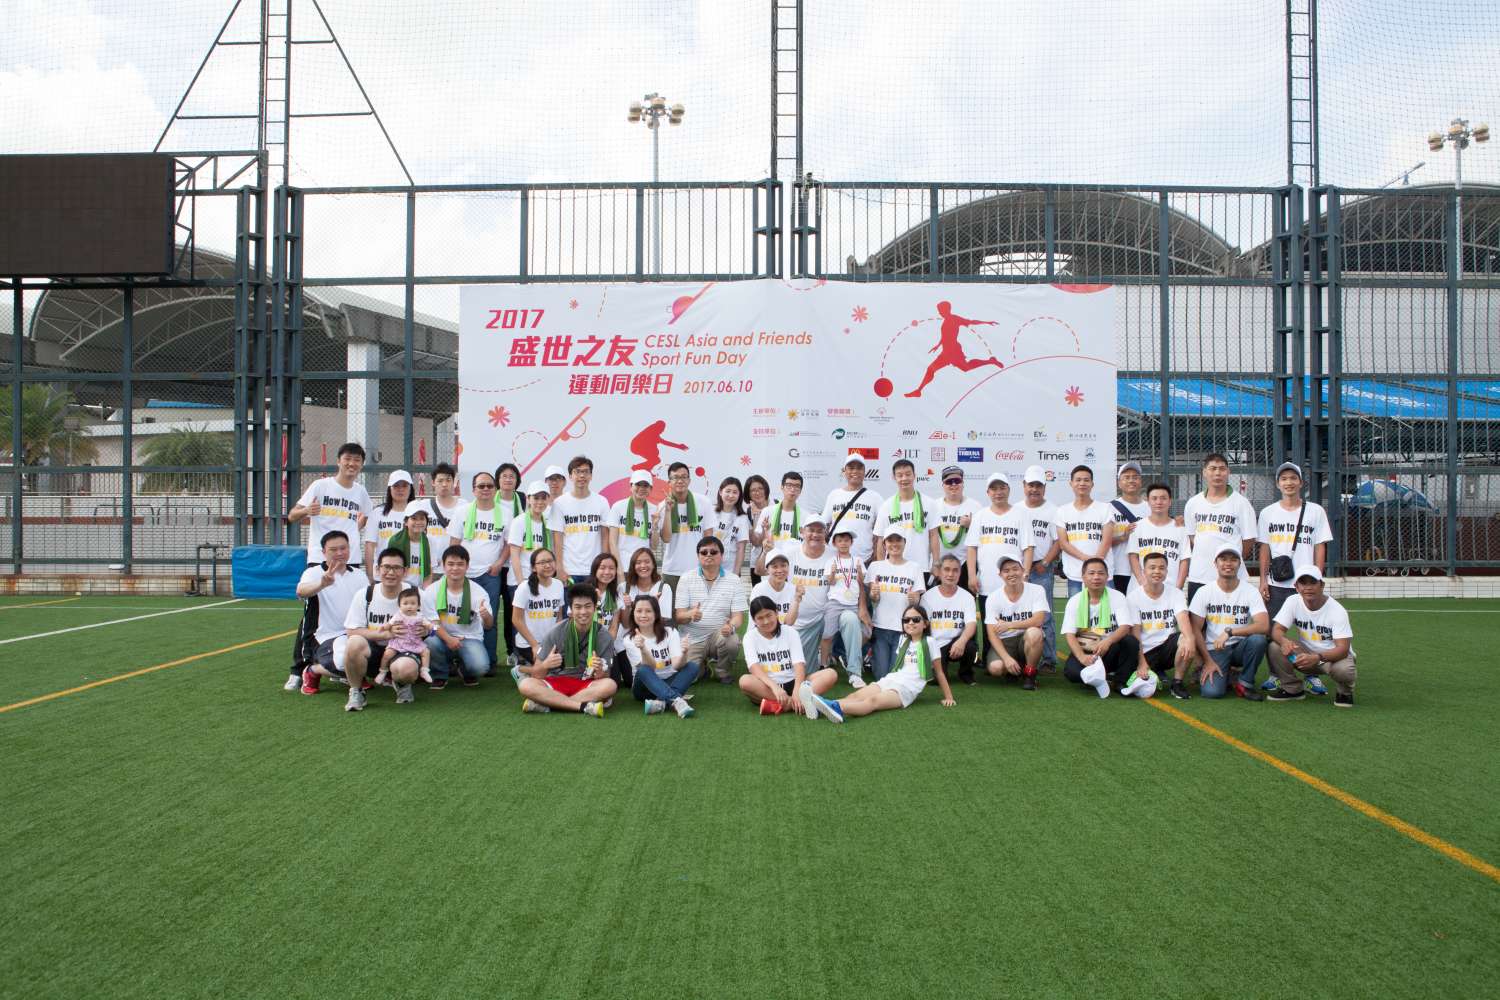 CESL Asia and Friends Strives for Social Integration at Sport Fun Day 2017